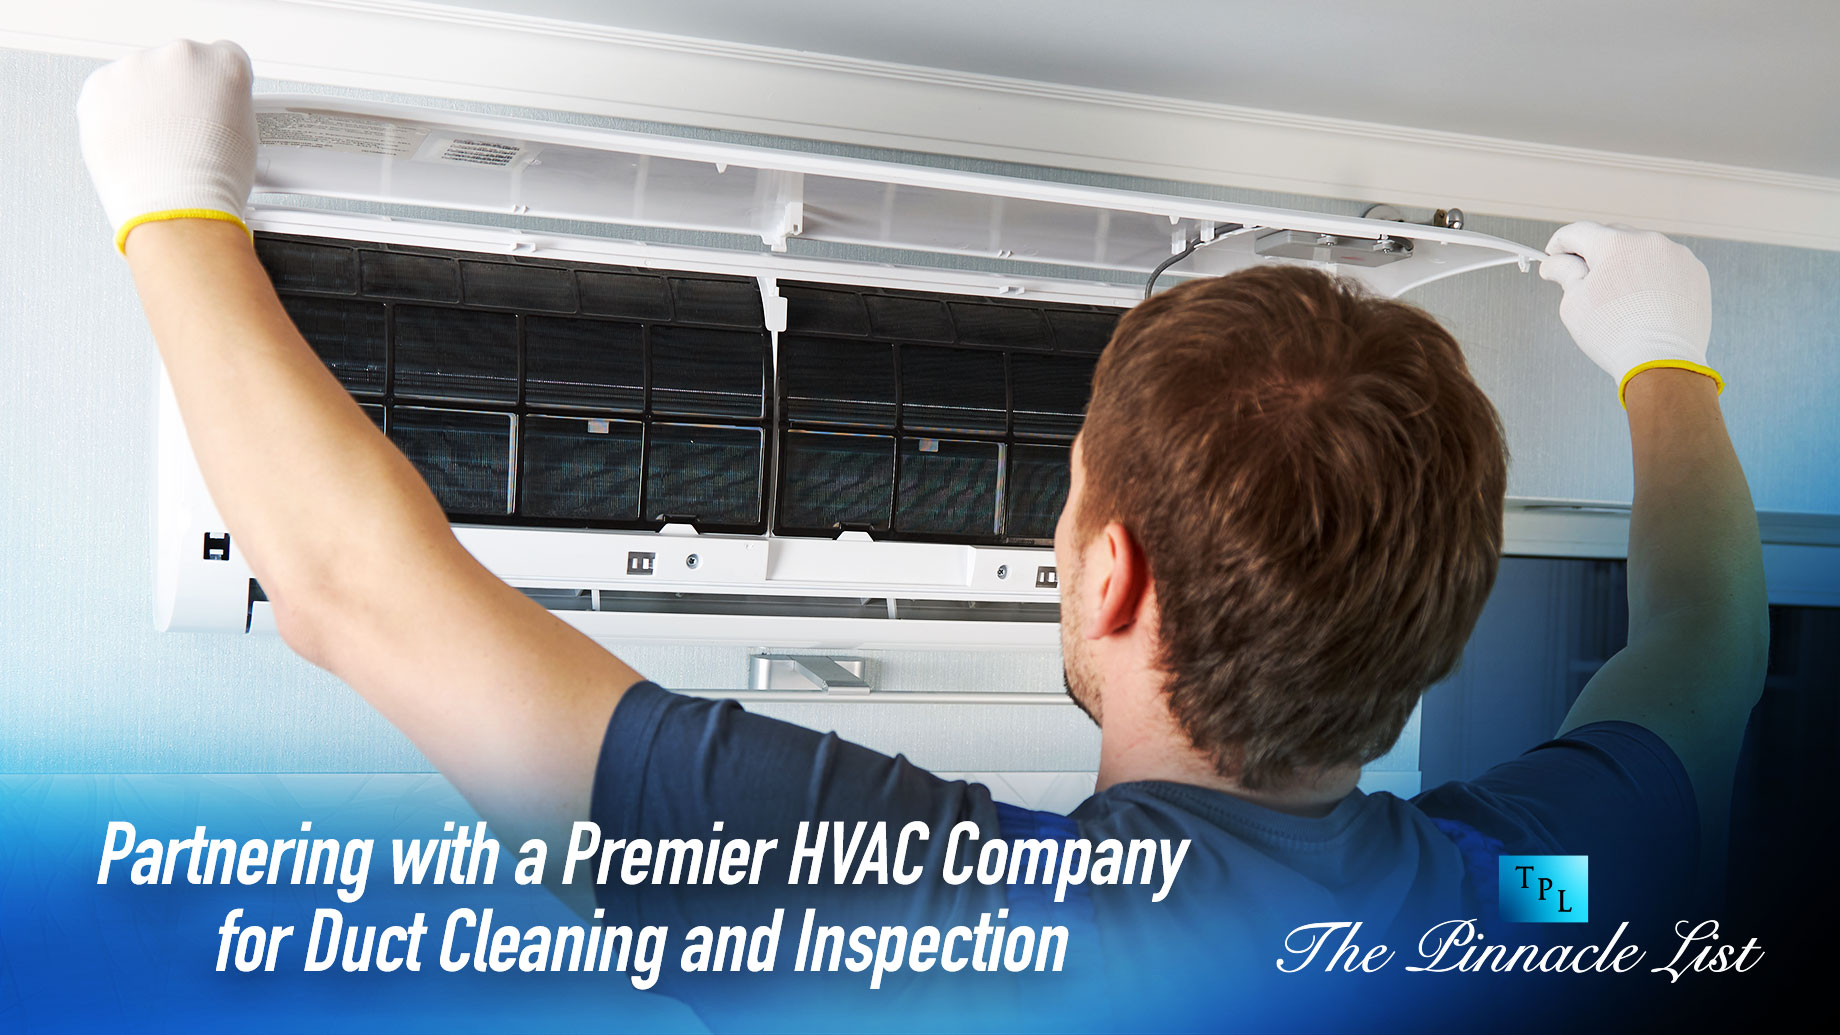 Partnering with a Premier HVAC Company for Duct Cleaning and Inspection